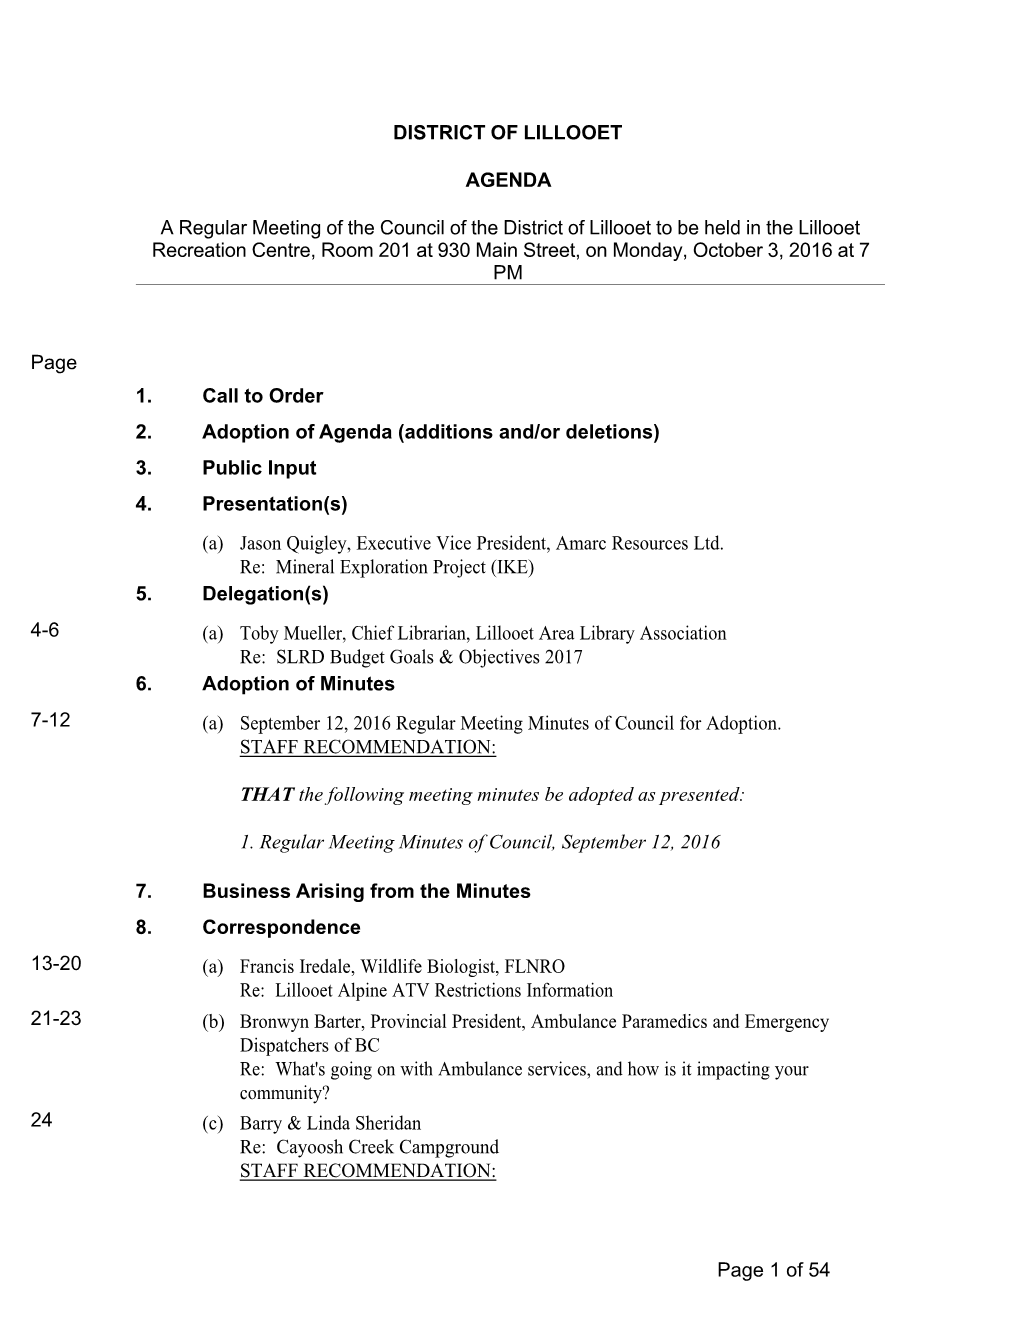 DISTRICT of LILLOOET AGENDA a Regular Meeting of the Council Of